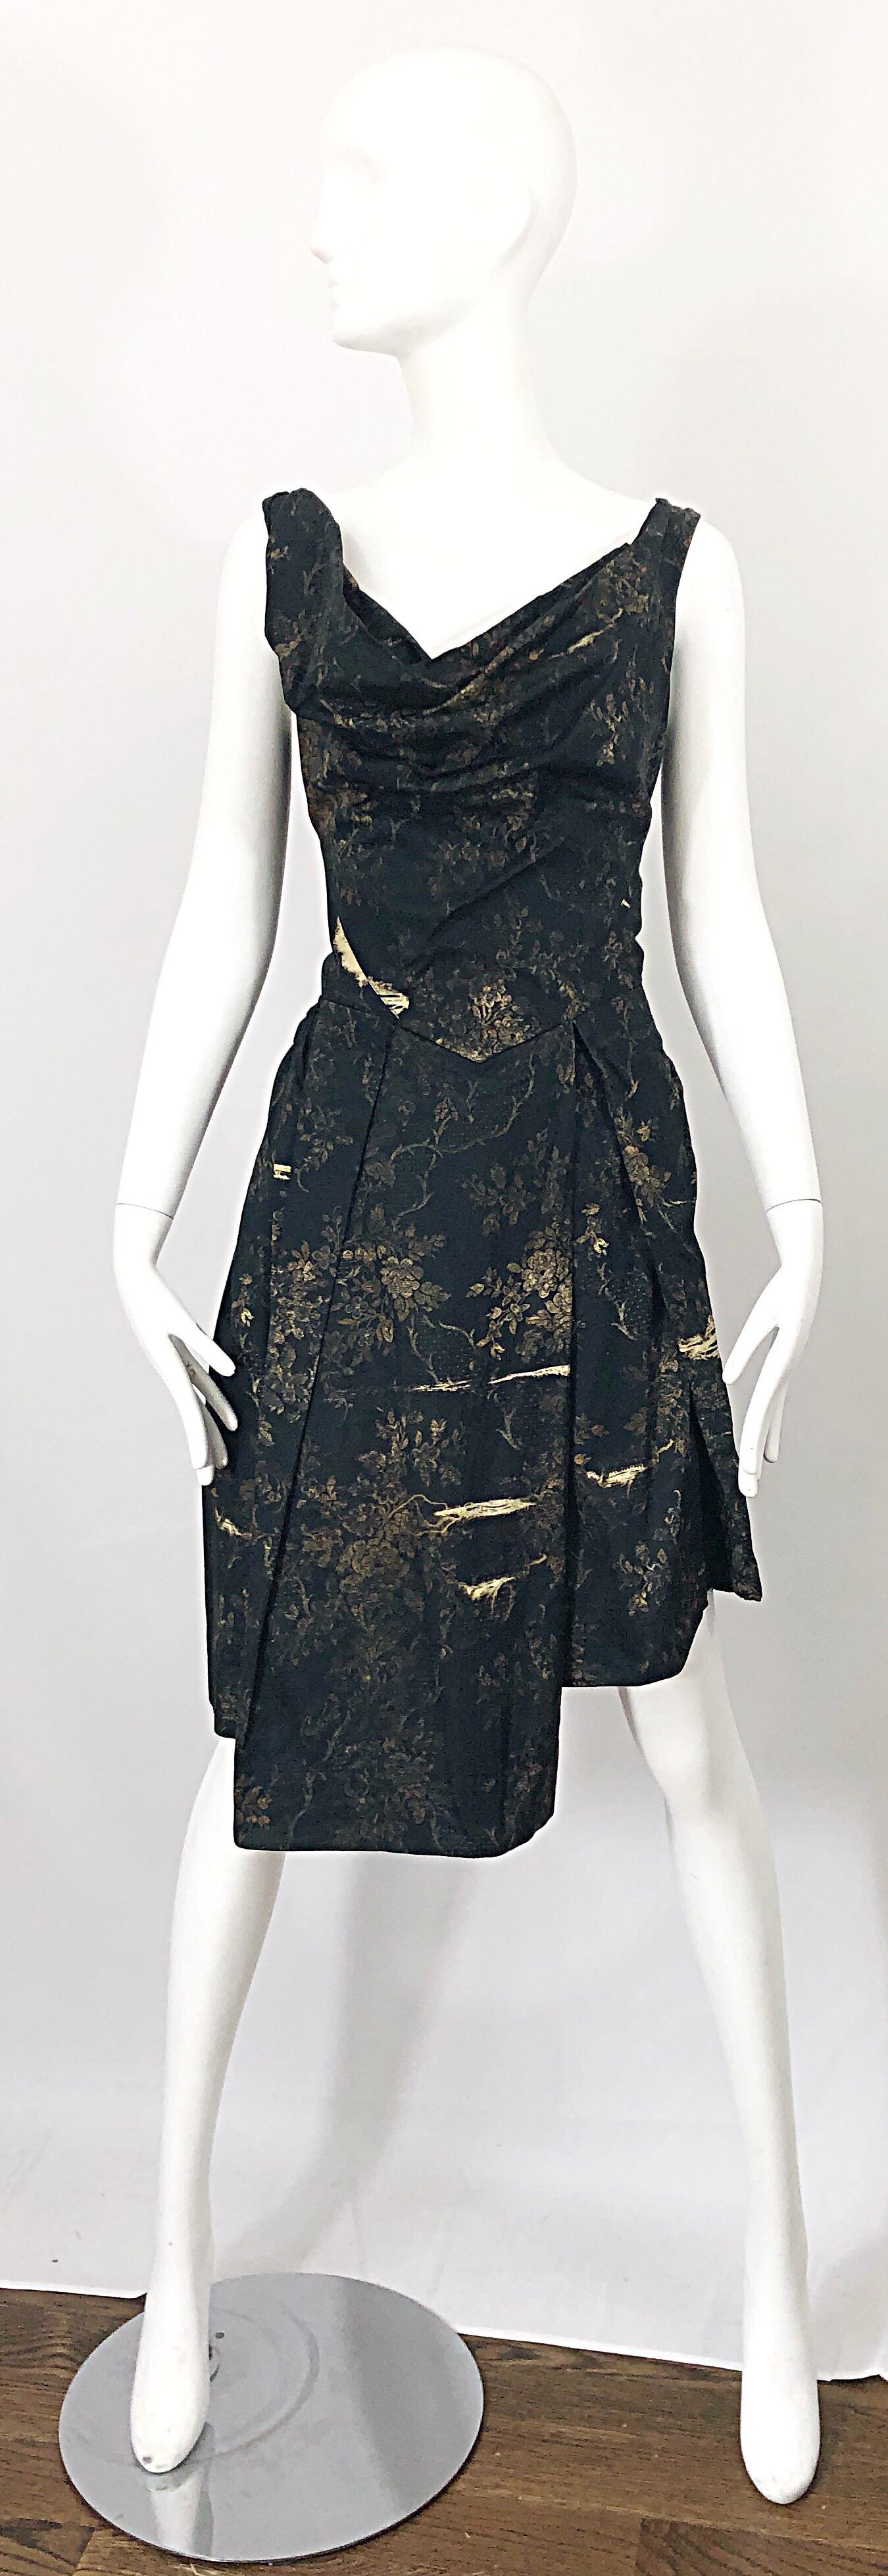 Avant Garde early 2000s  VIVENNE WESTWOOD black and brown flower print asymmetrical dress! Features Westwood's signature draped bodice. Hi-Lo skirt. Hidden zipper up the back with hook-and-eye closure. POCKET at one side of the hip.
 Can also be